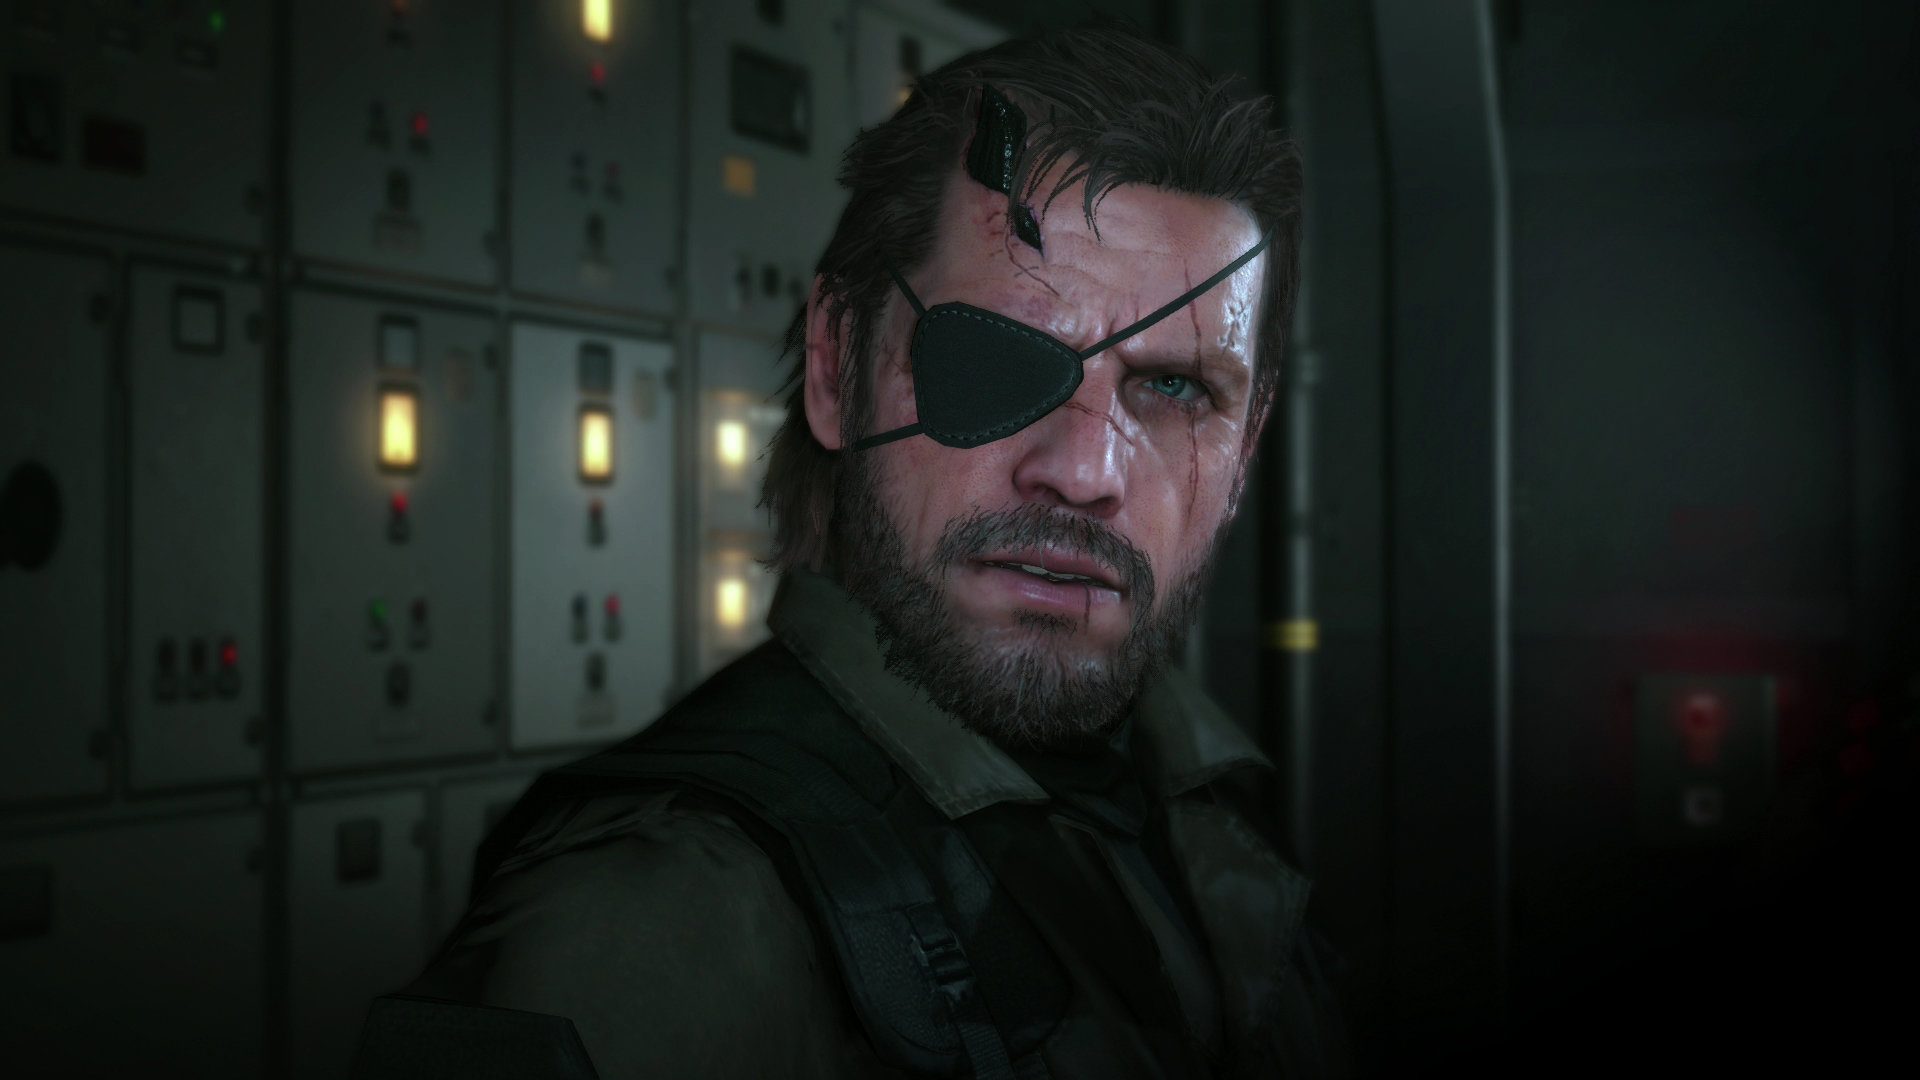 Awesome Metal Gear Solid 5 (V): The Phantom Pain (MGSV 5) free background ID:460436 for 1080p desktop